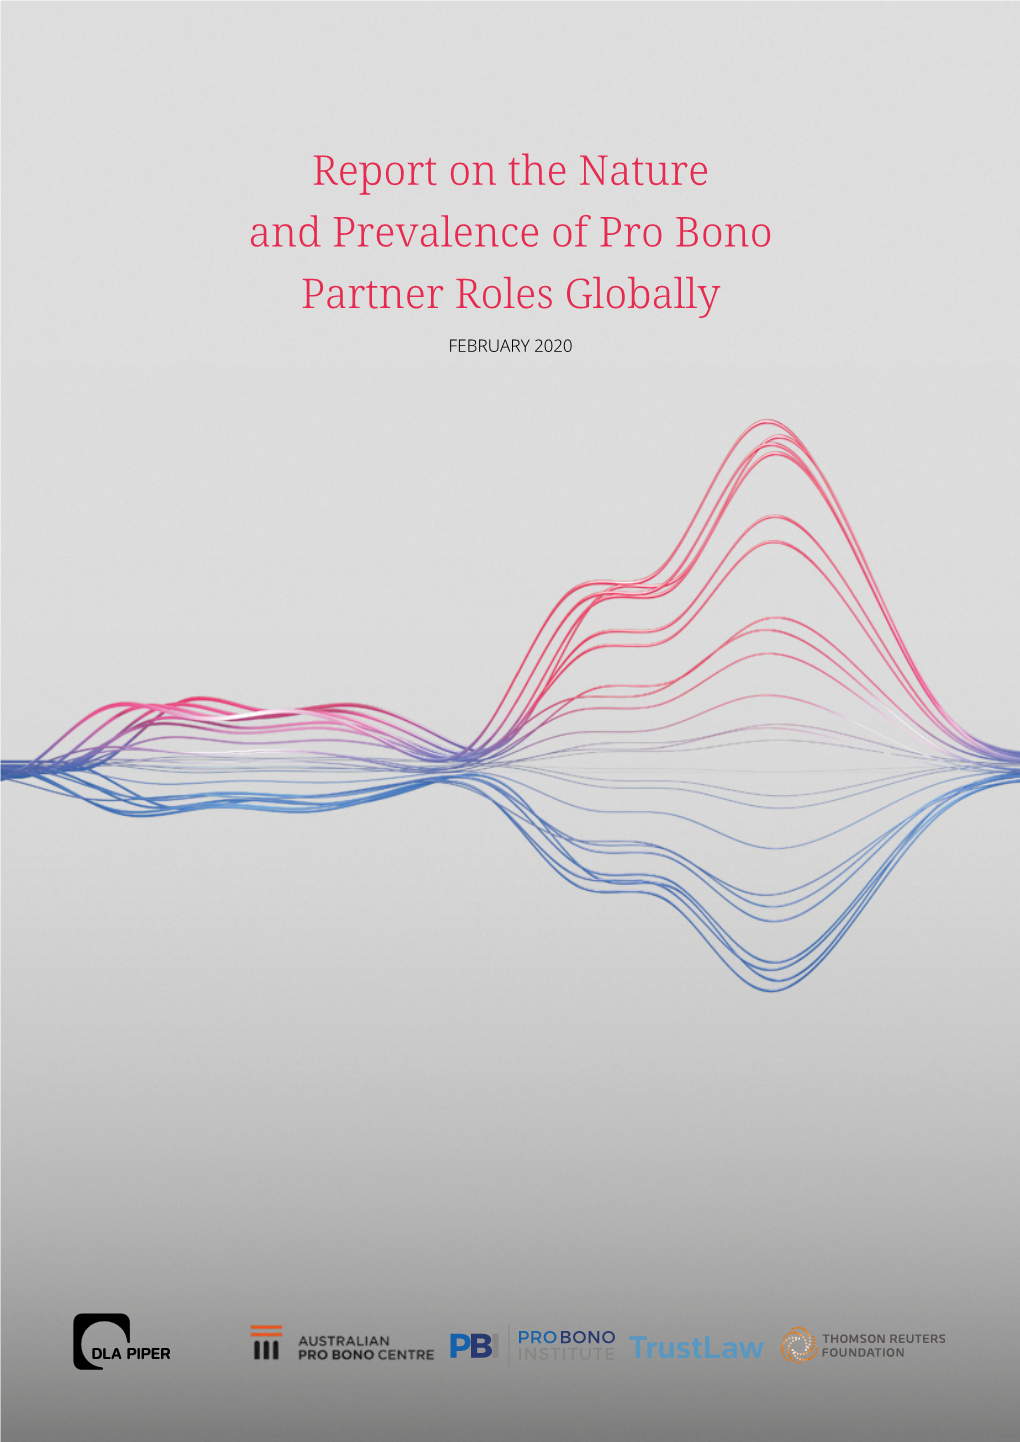 Report on the Nature and Prevalence of Pro Bono Partner Roles Globally